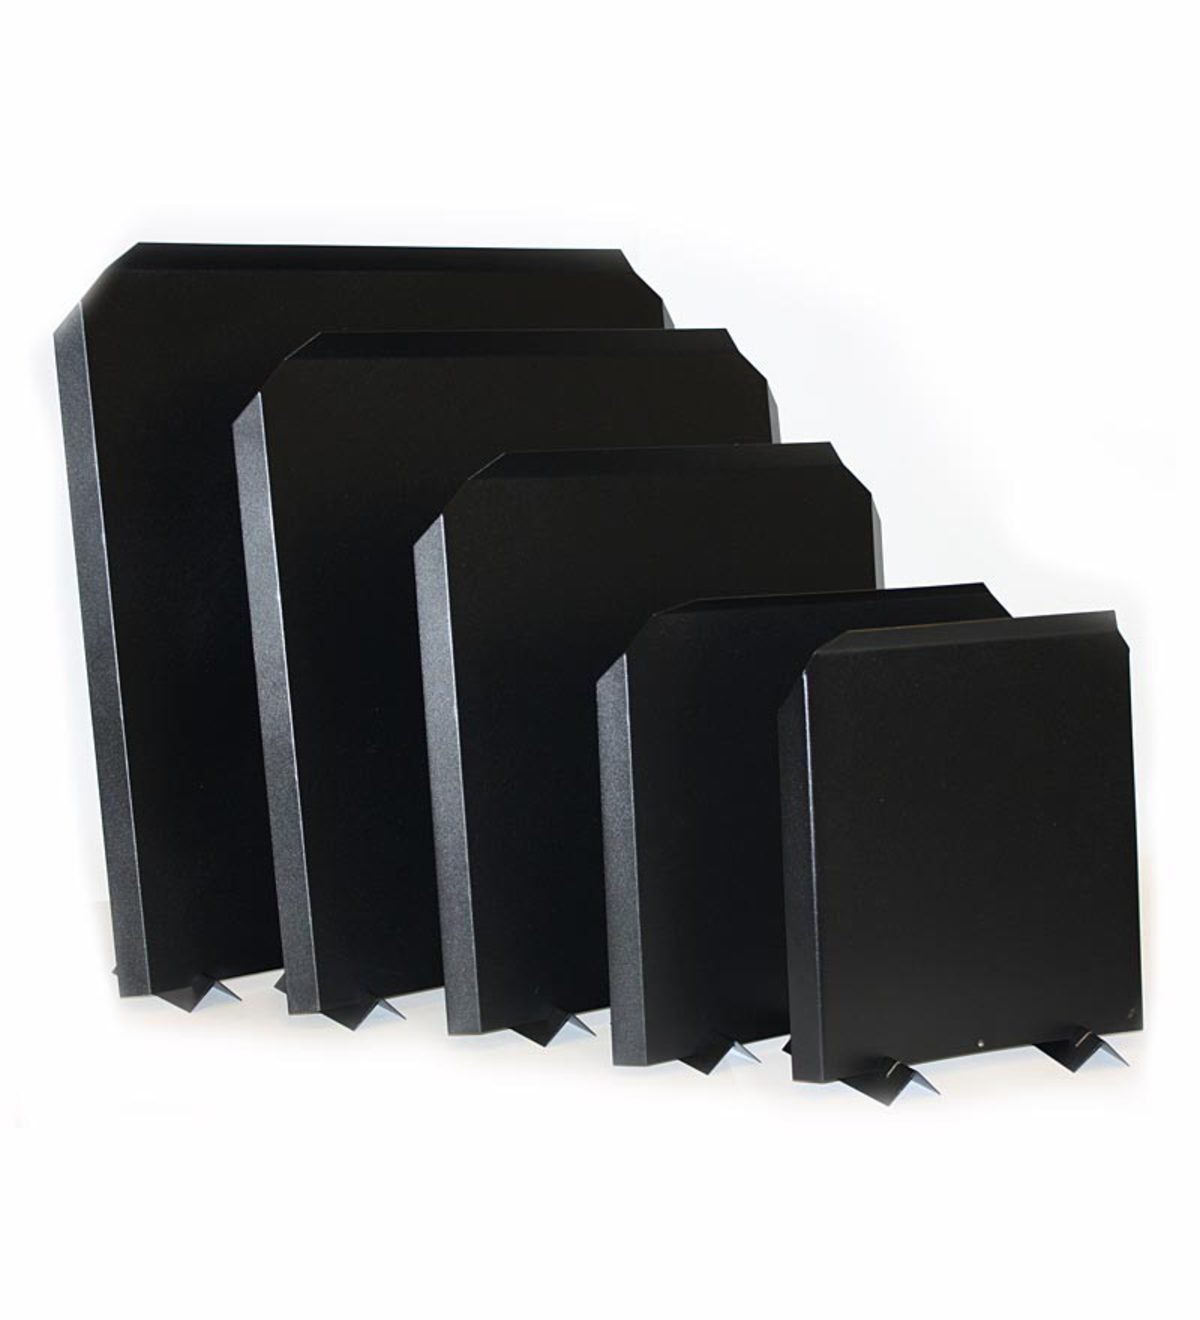 USA-Made Stainless Steel Fireback in Black Finish